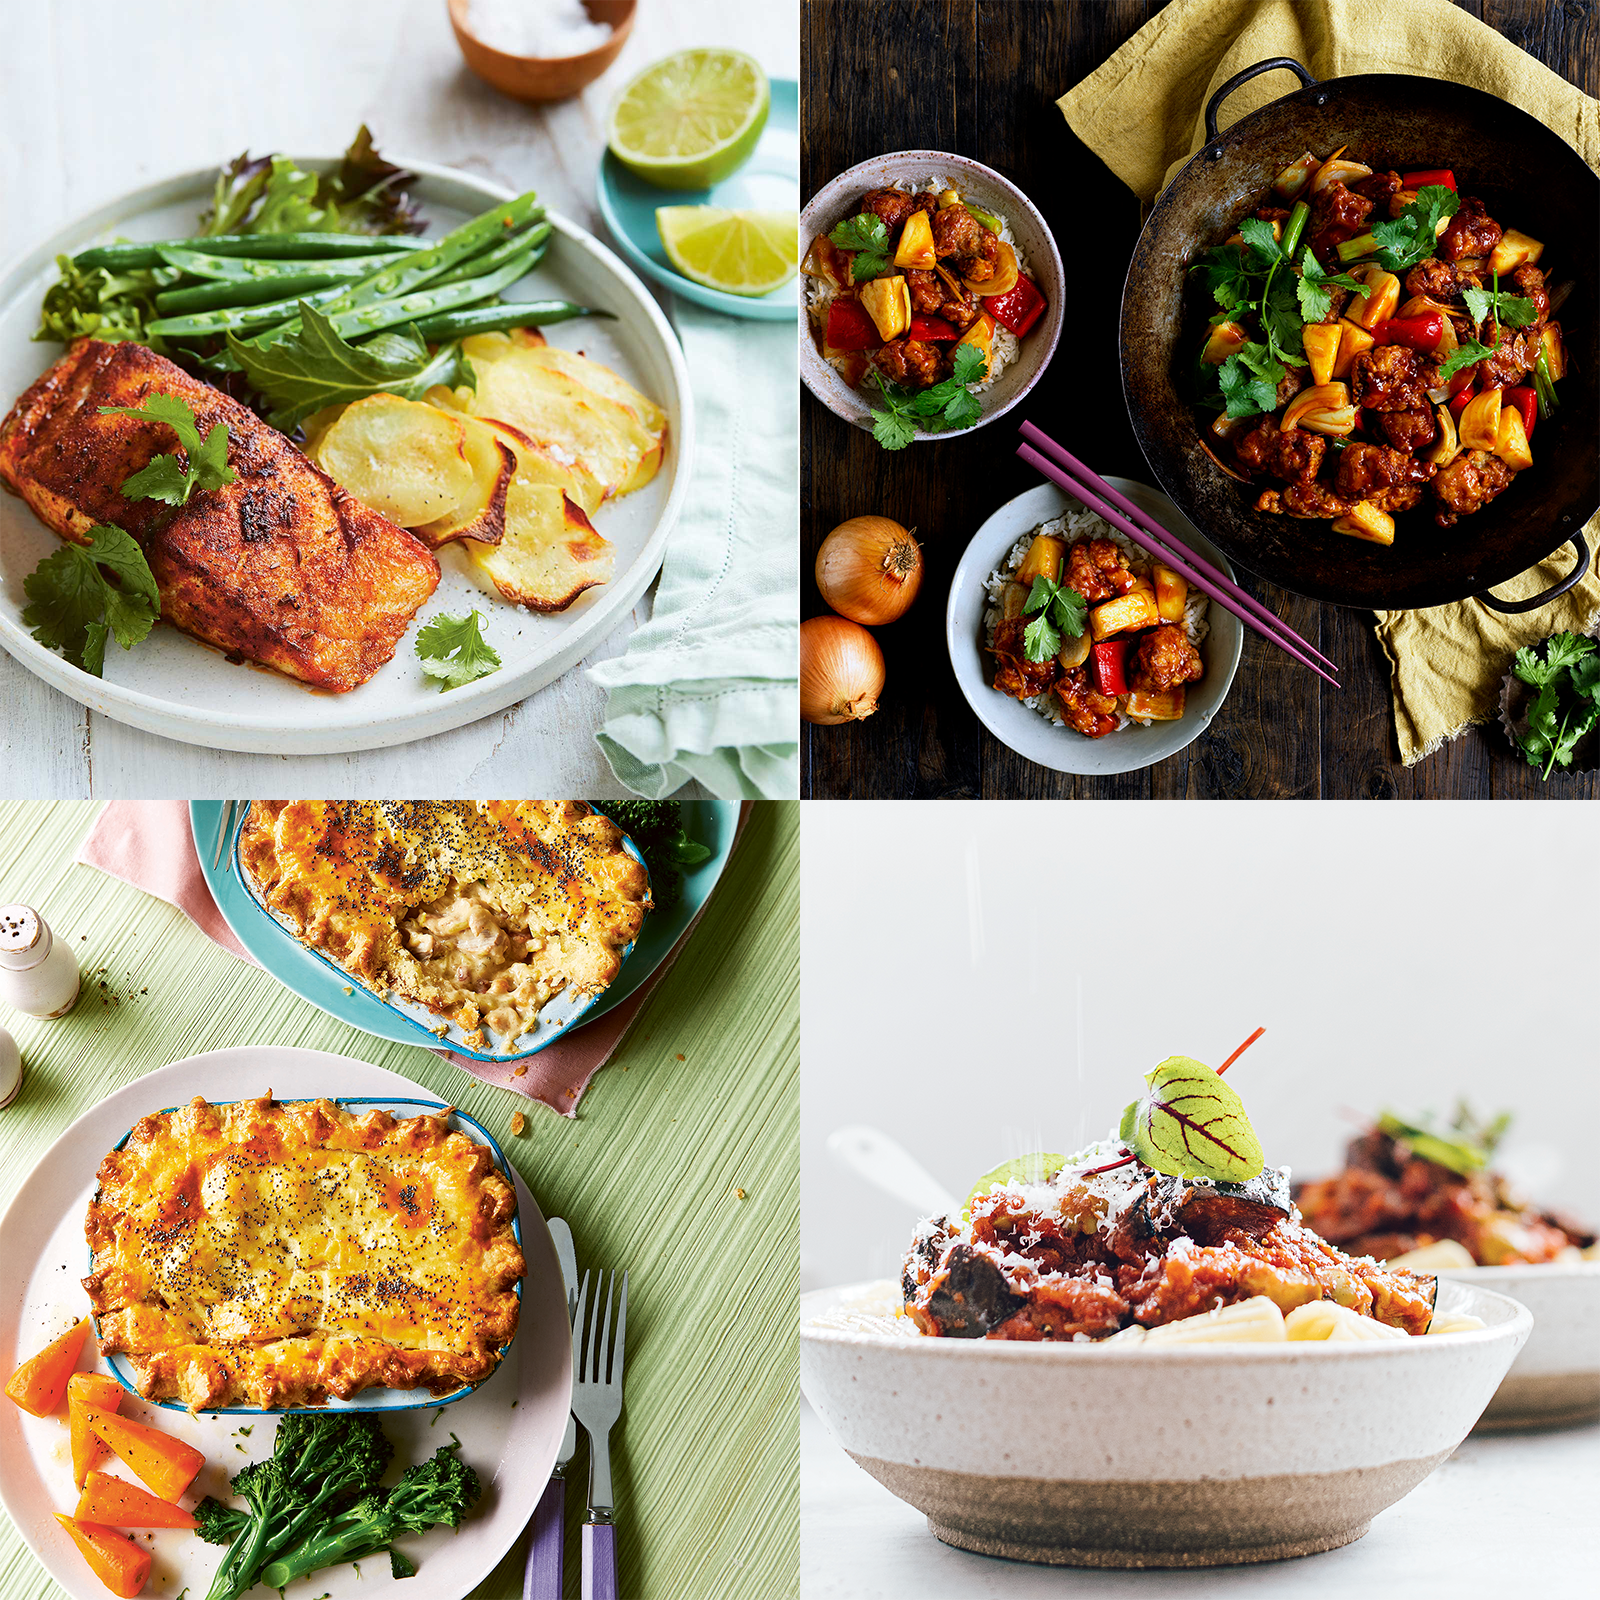 Assorted gluten-free meals as part of our gluten-free meal plan.